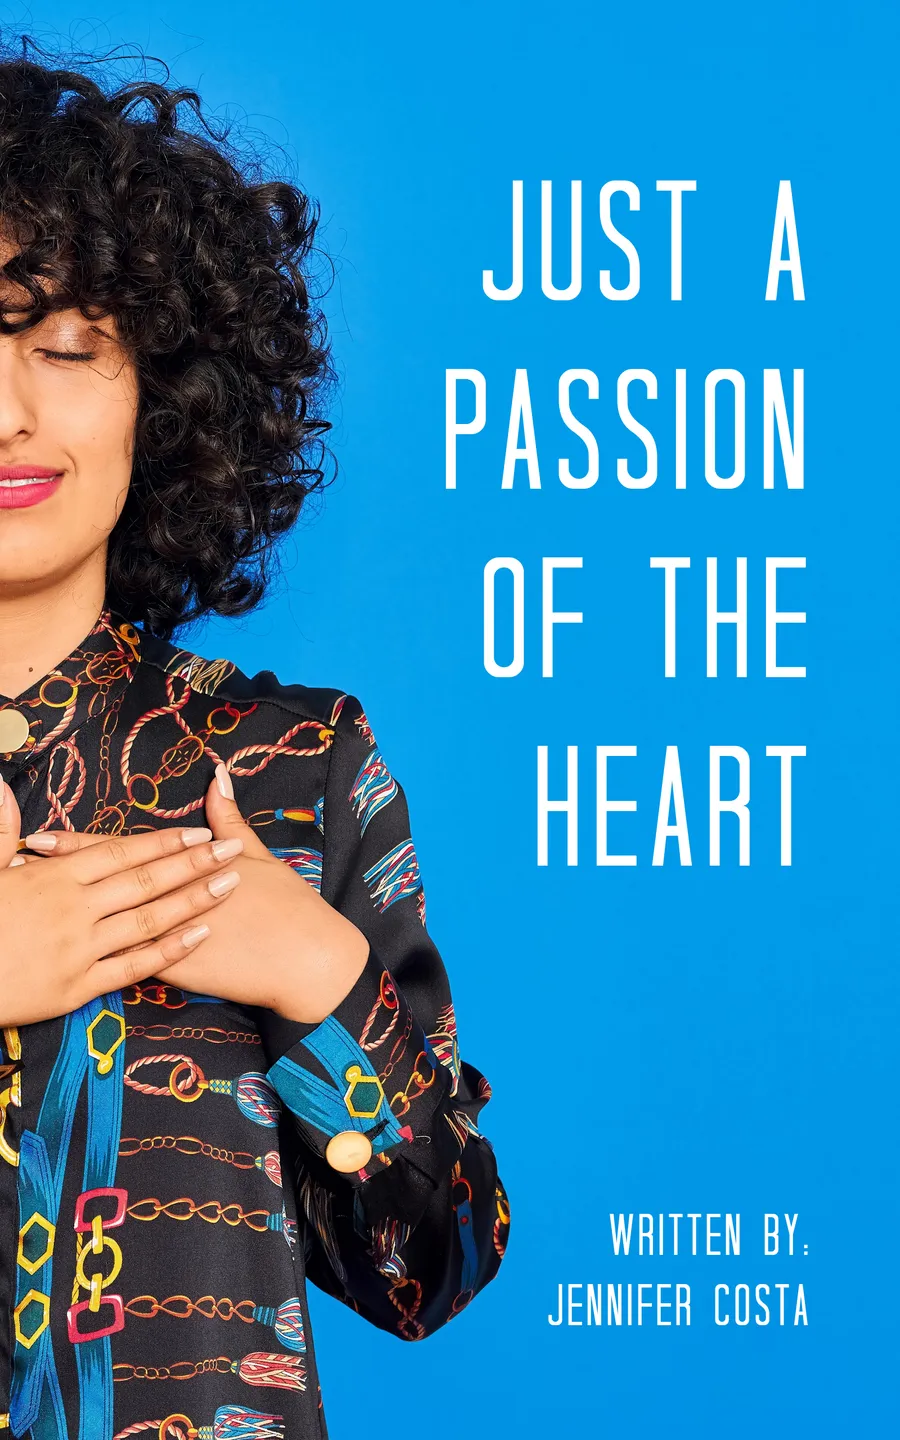 Just A Passion of the Heart book-covers template